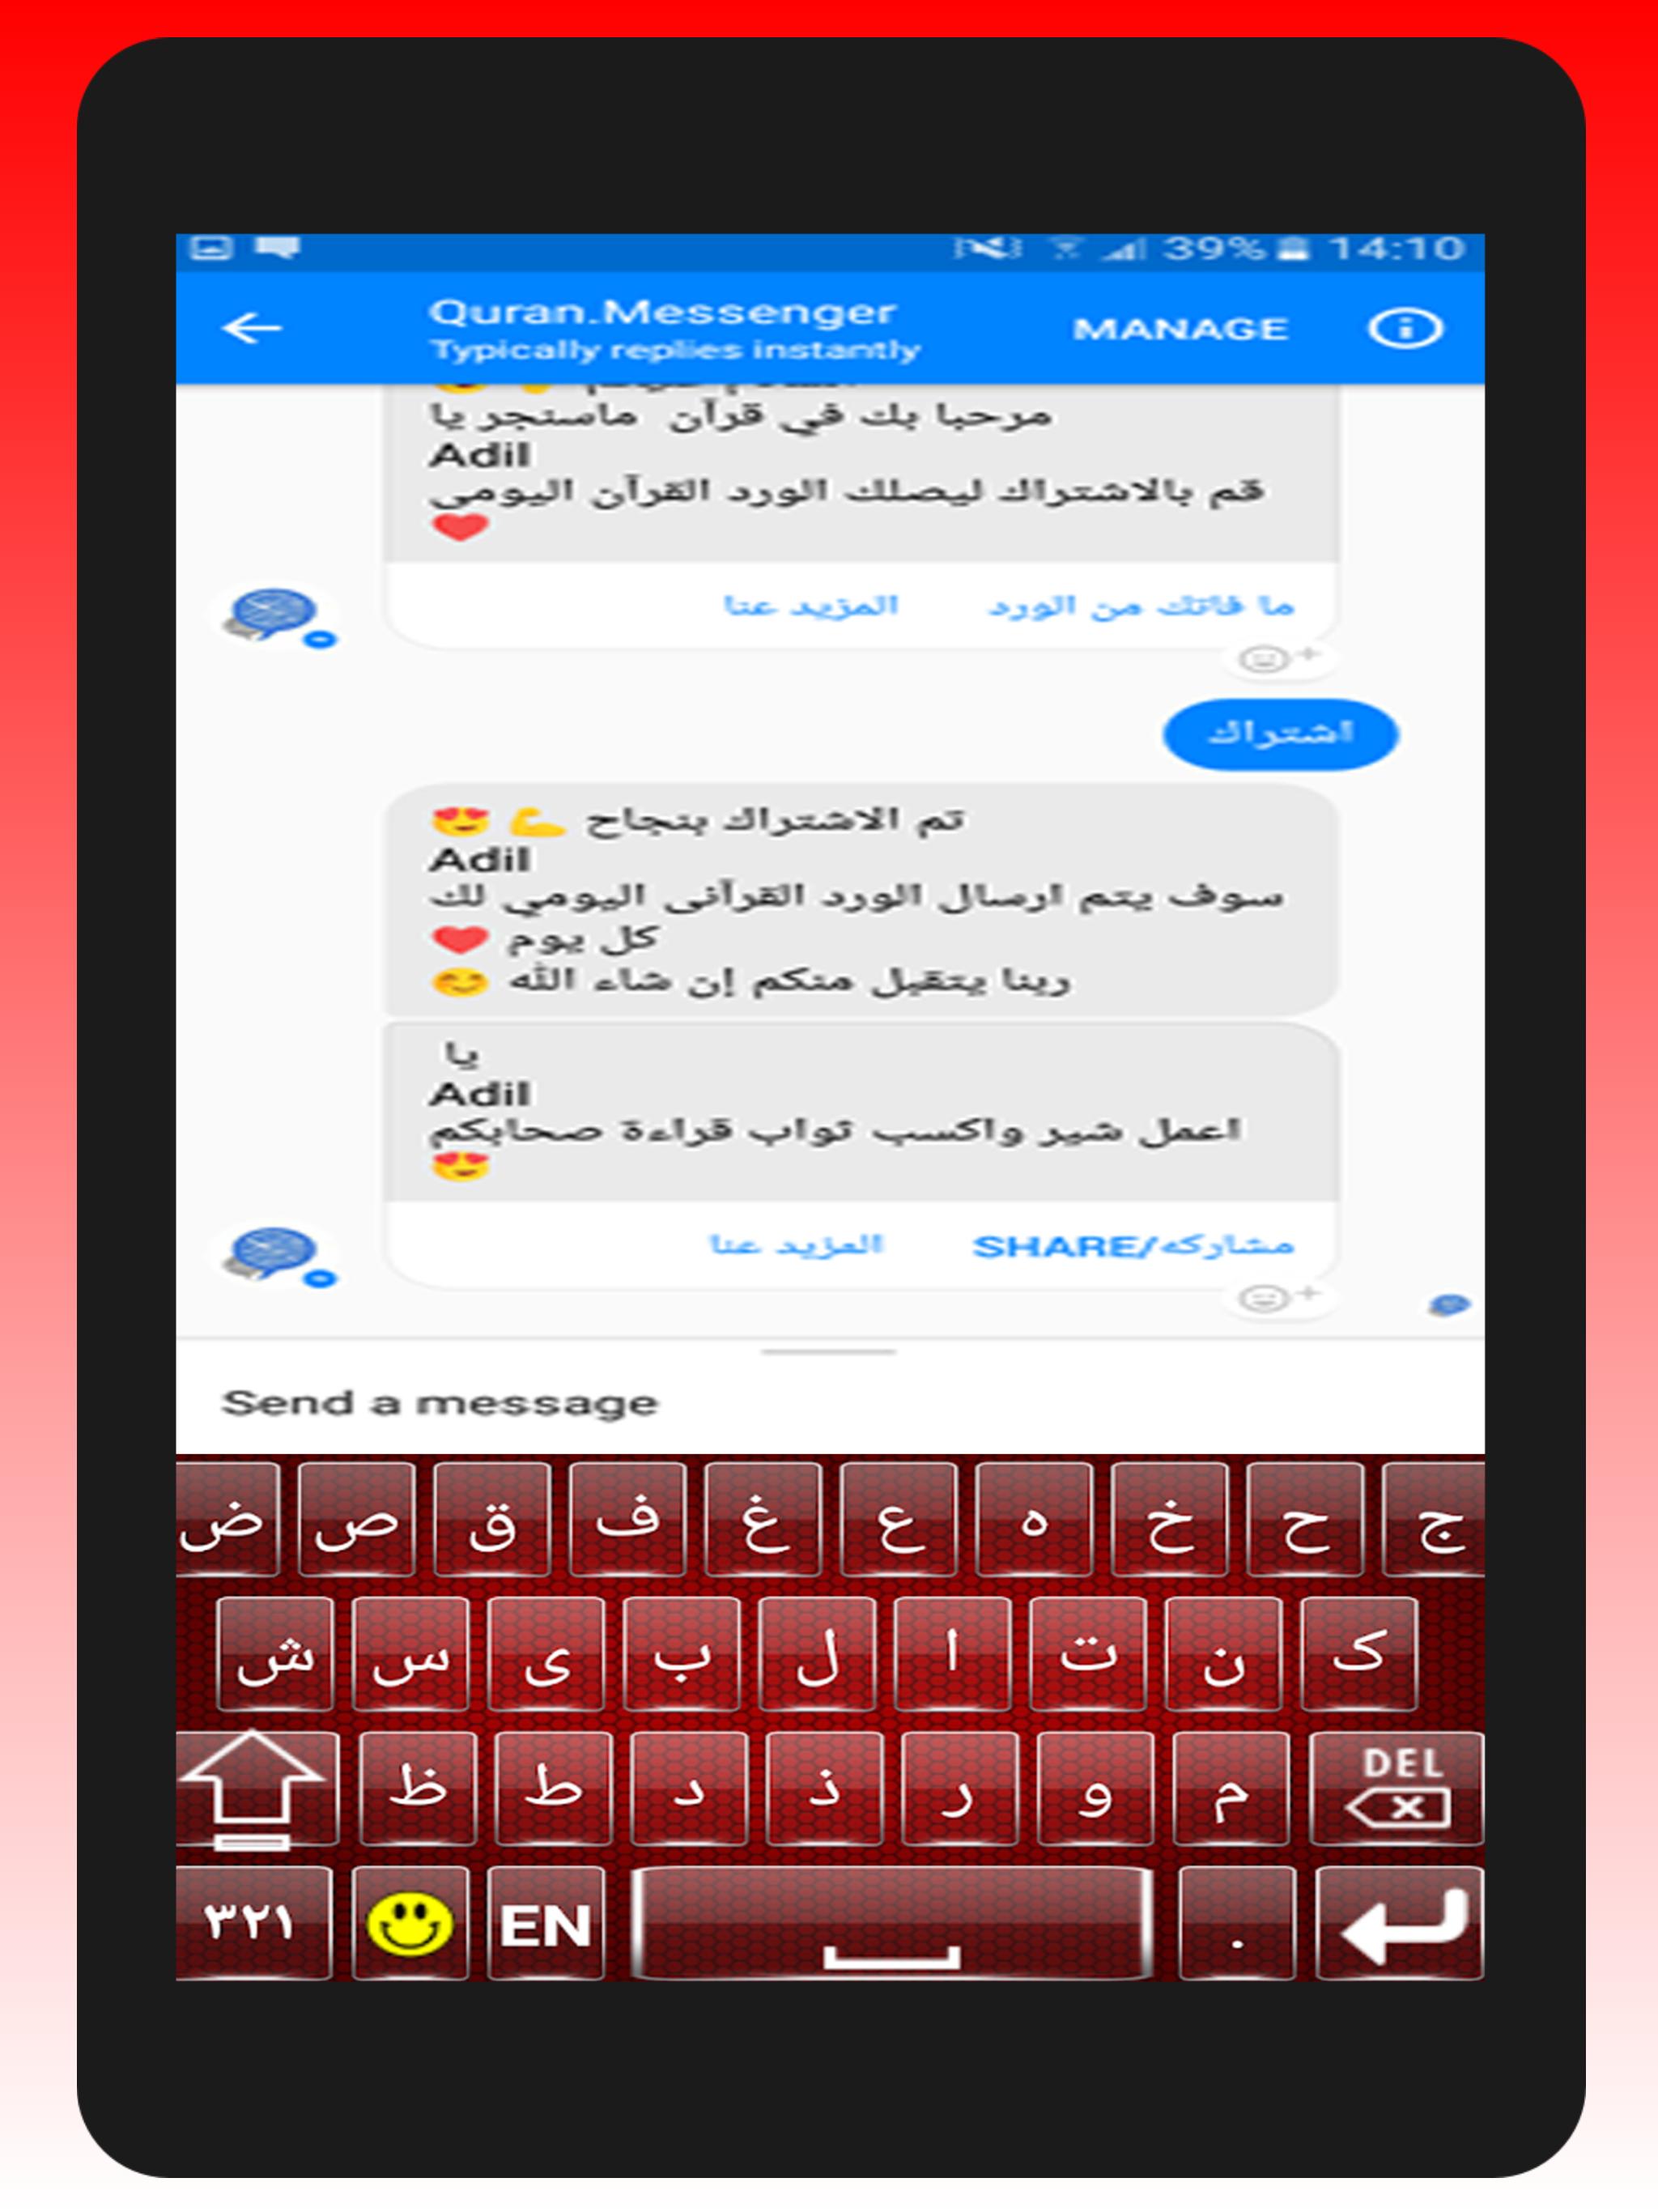 Download Screen Keyboard Arab Sticker Arabic Keyboard For Android Apk Download Download Arabic Keyboard For Windows To Add The Arabic Language To Your Pc Dorathy Ree